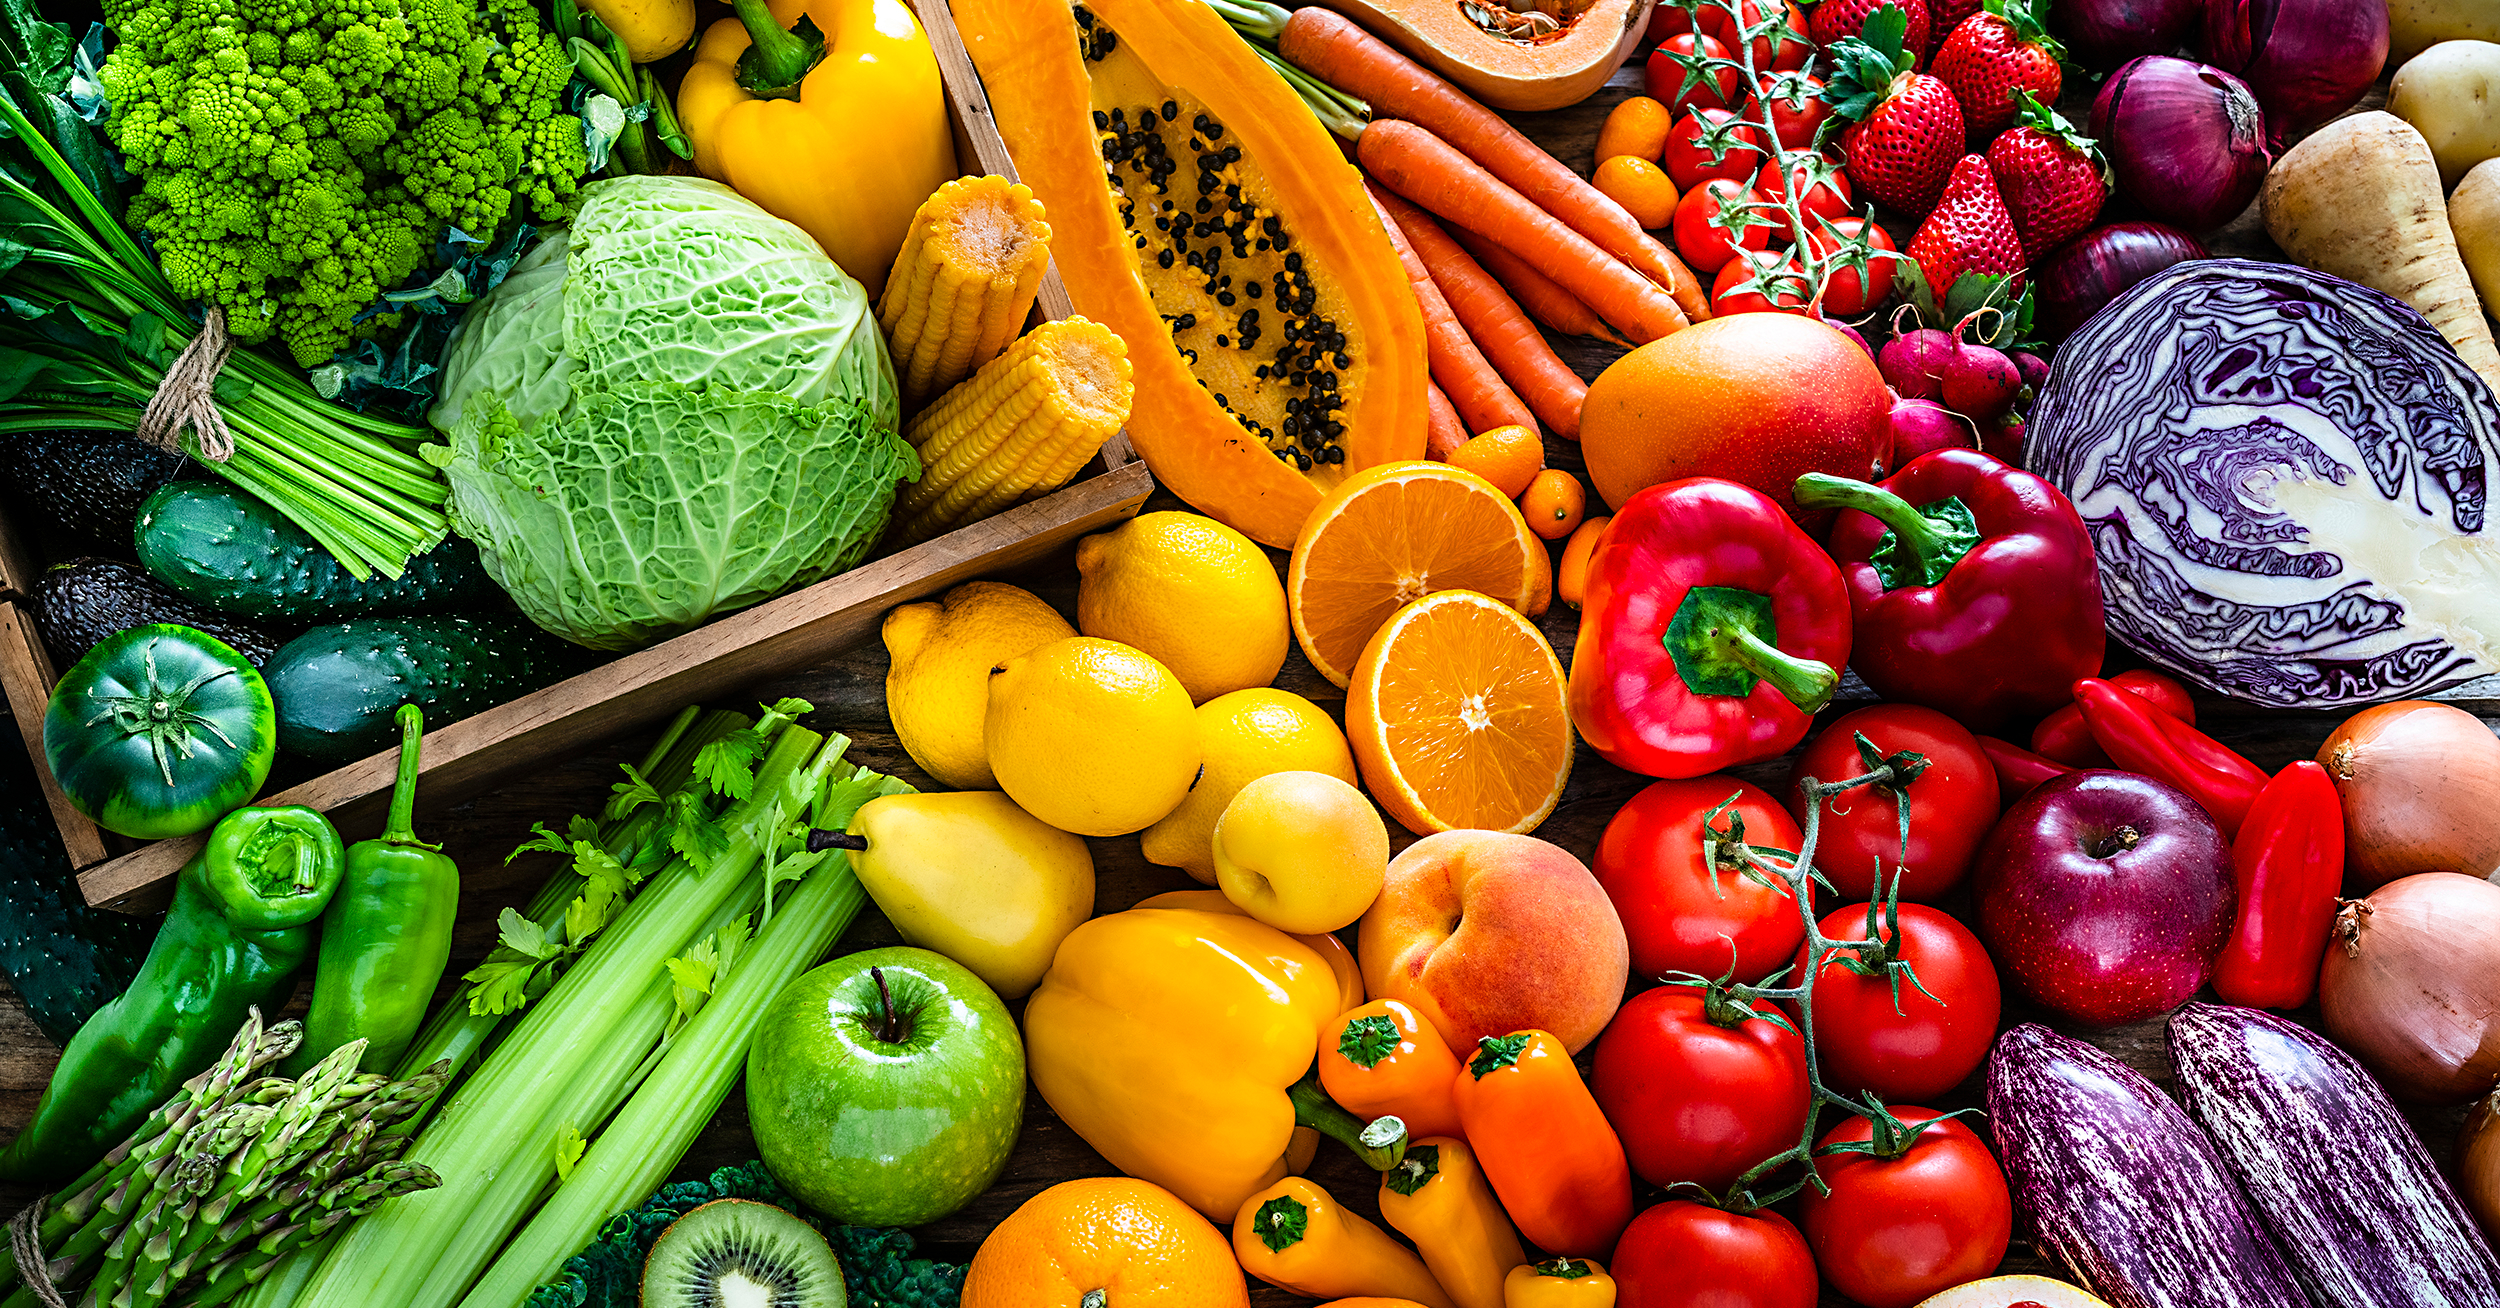 In order to have a fiber-rich diet, you must eat a variety of fruits and vegetables.